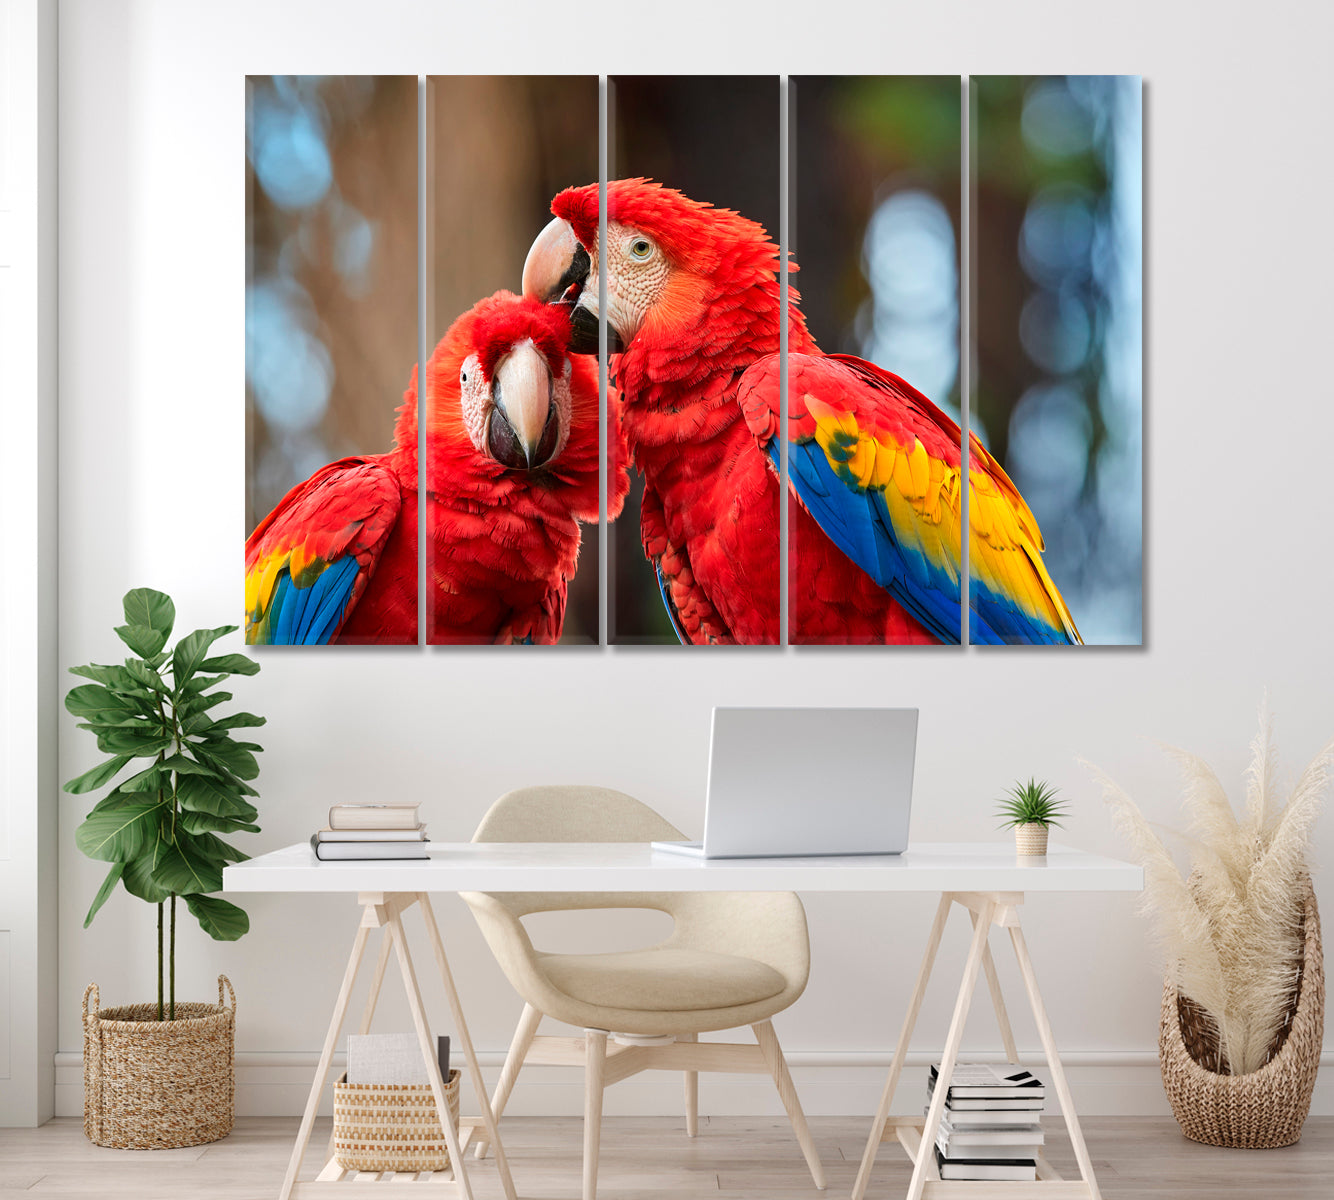 Pair of Parrot Scarlet Macaw Canvas Print ArtLexy 5 Panels 36"x24" inches 